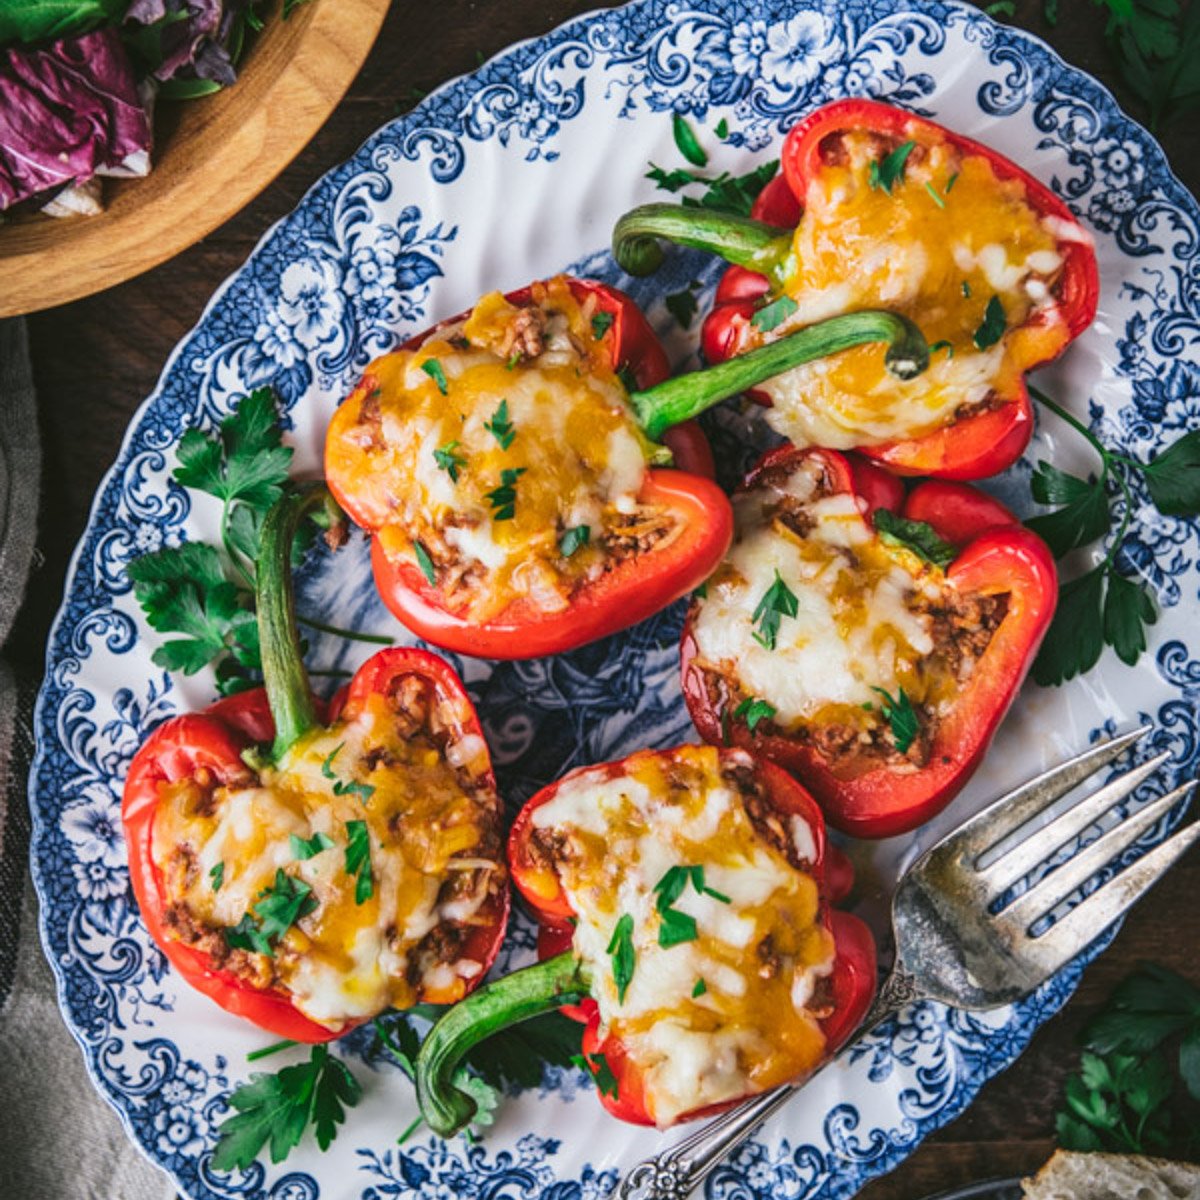 https://www.theseasonedmom.com/wp-content/uploads/2020/08/Stuffed-Peppers-with-Rice-Featured.jpg